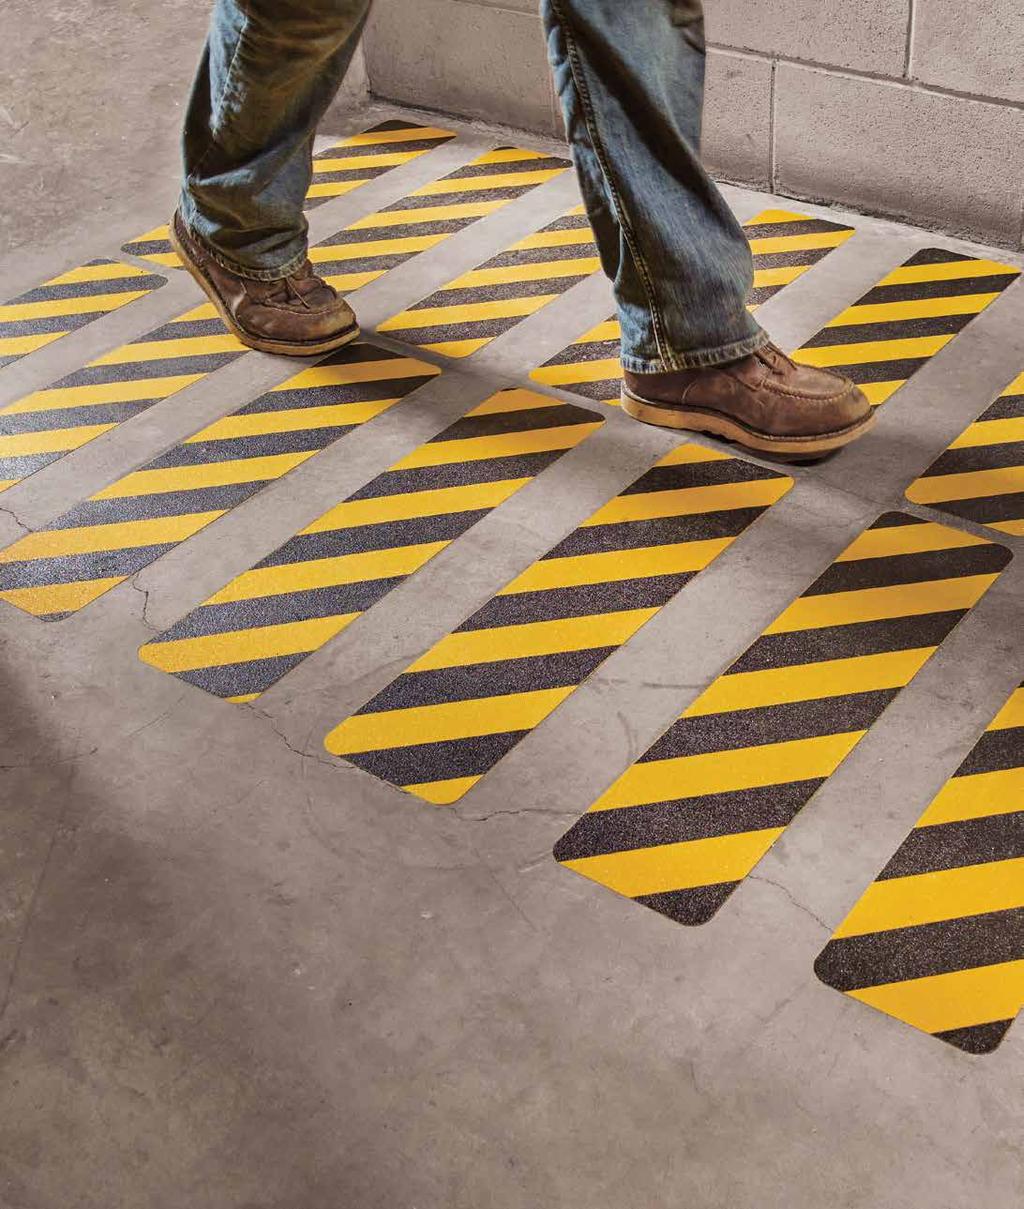 A science dedicated to helping you reduce the risk of slips, trips and falls.